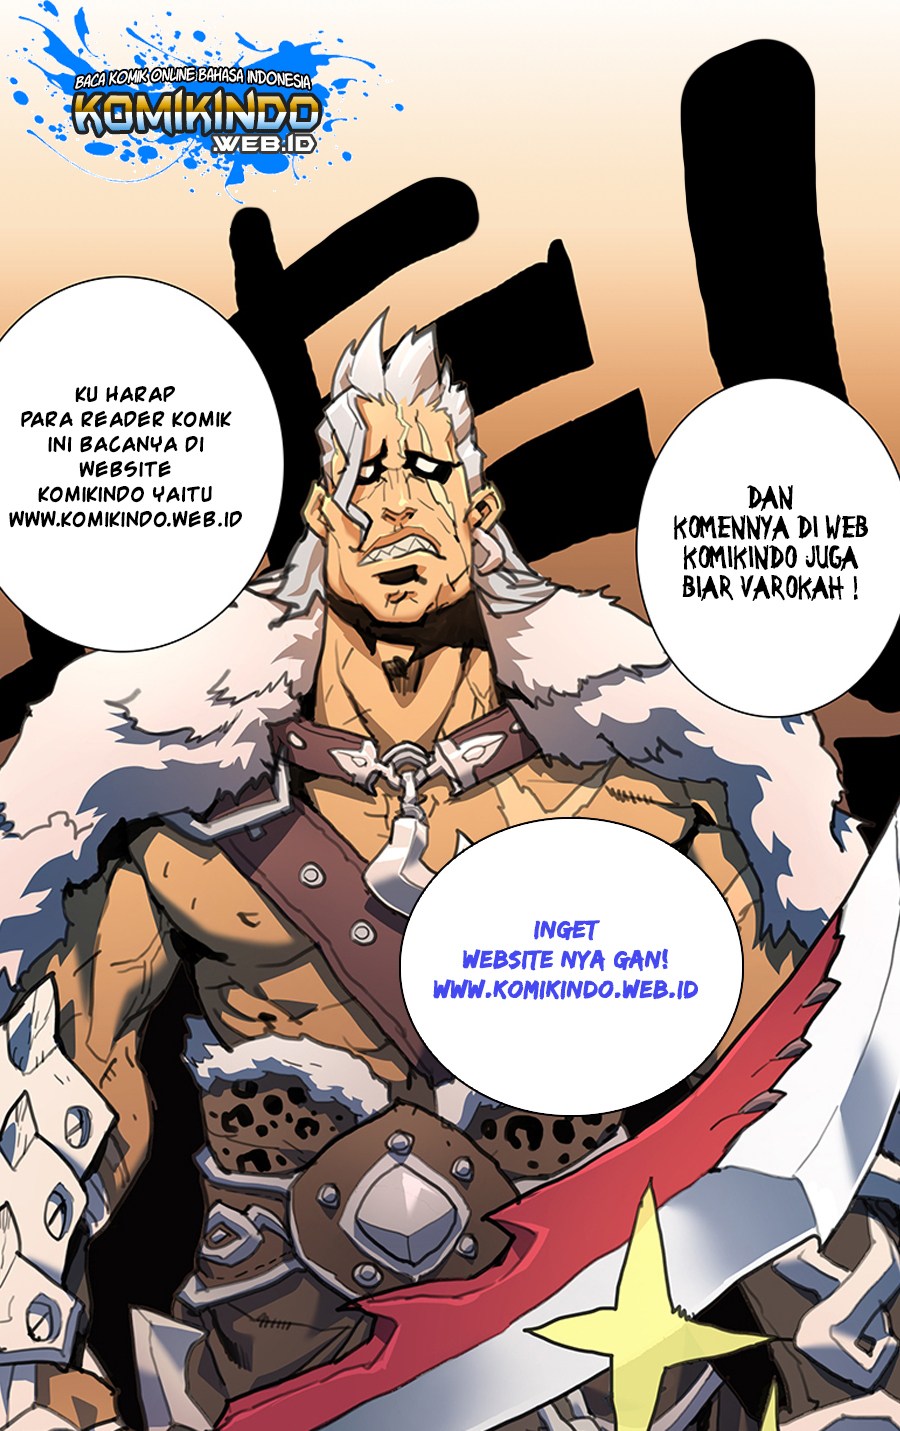 Lord Xue Ying Chapter 08.3